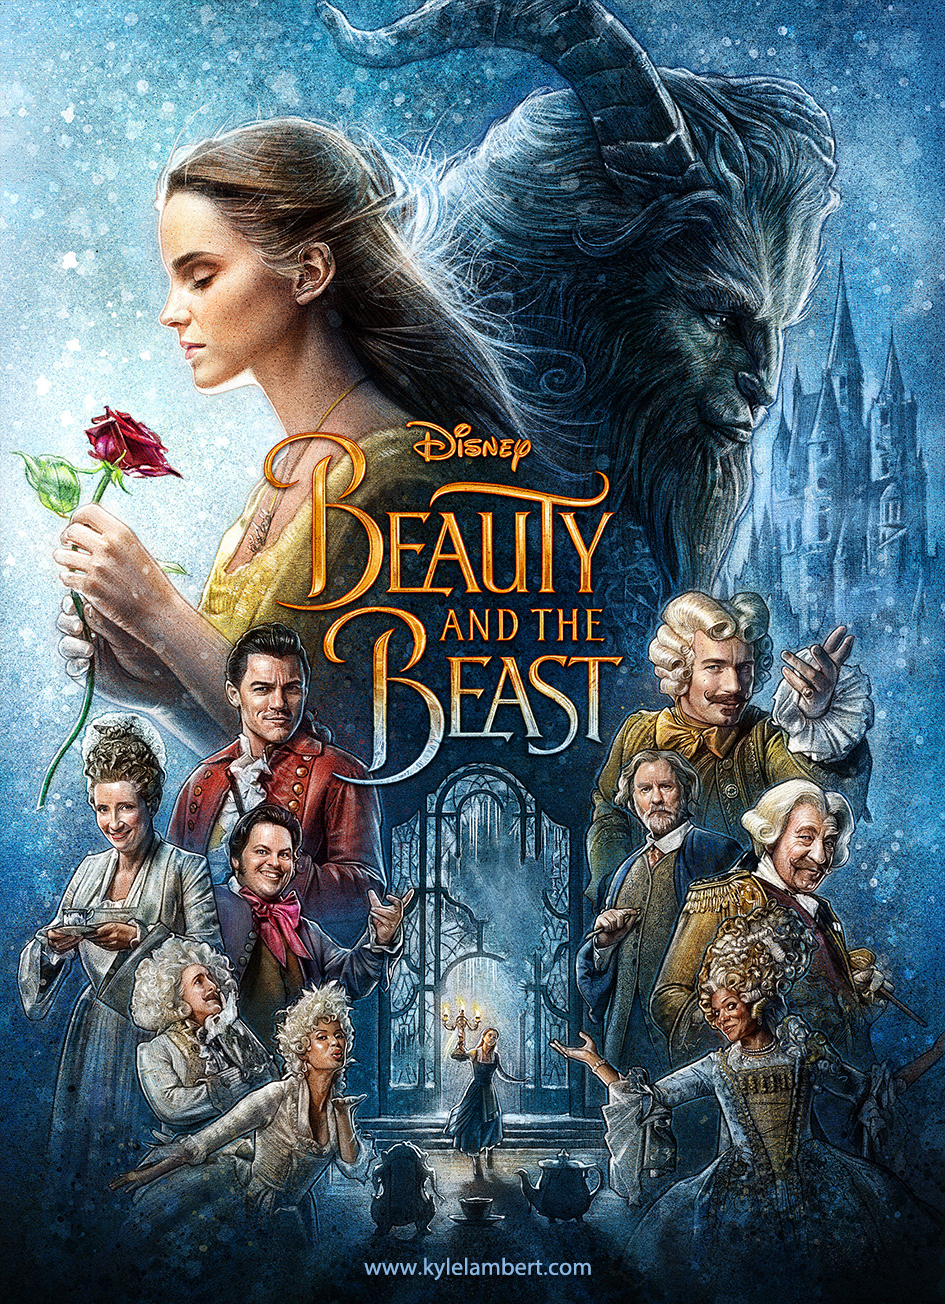 Beauty and the Beast Poster by Kyle Lambert